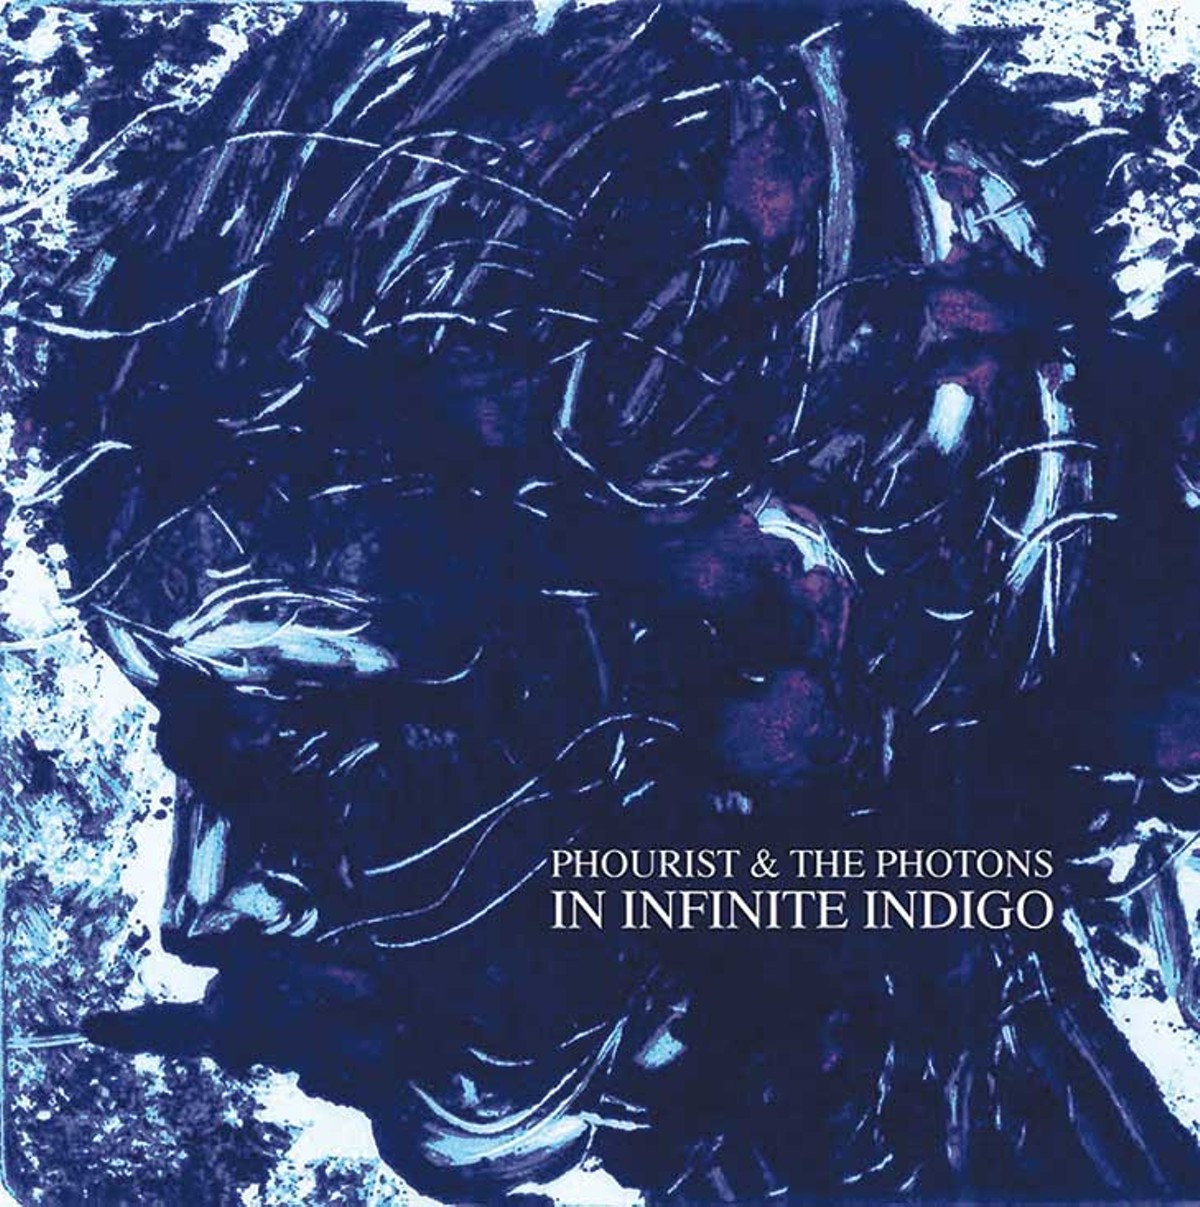 Phourist and the Photons: In Infinite Indigo